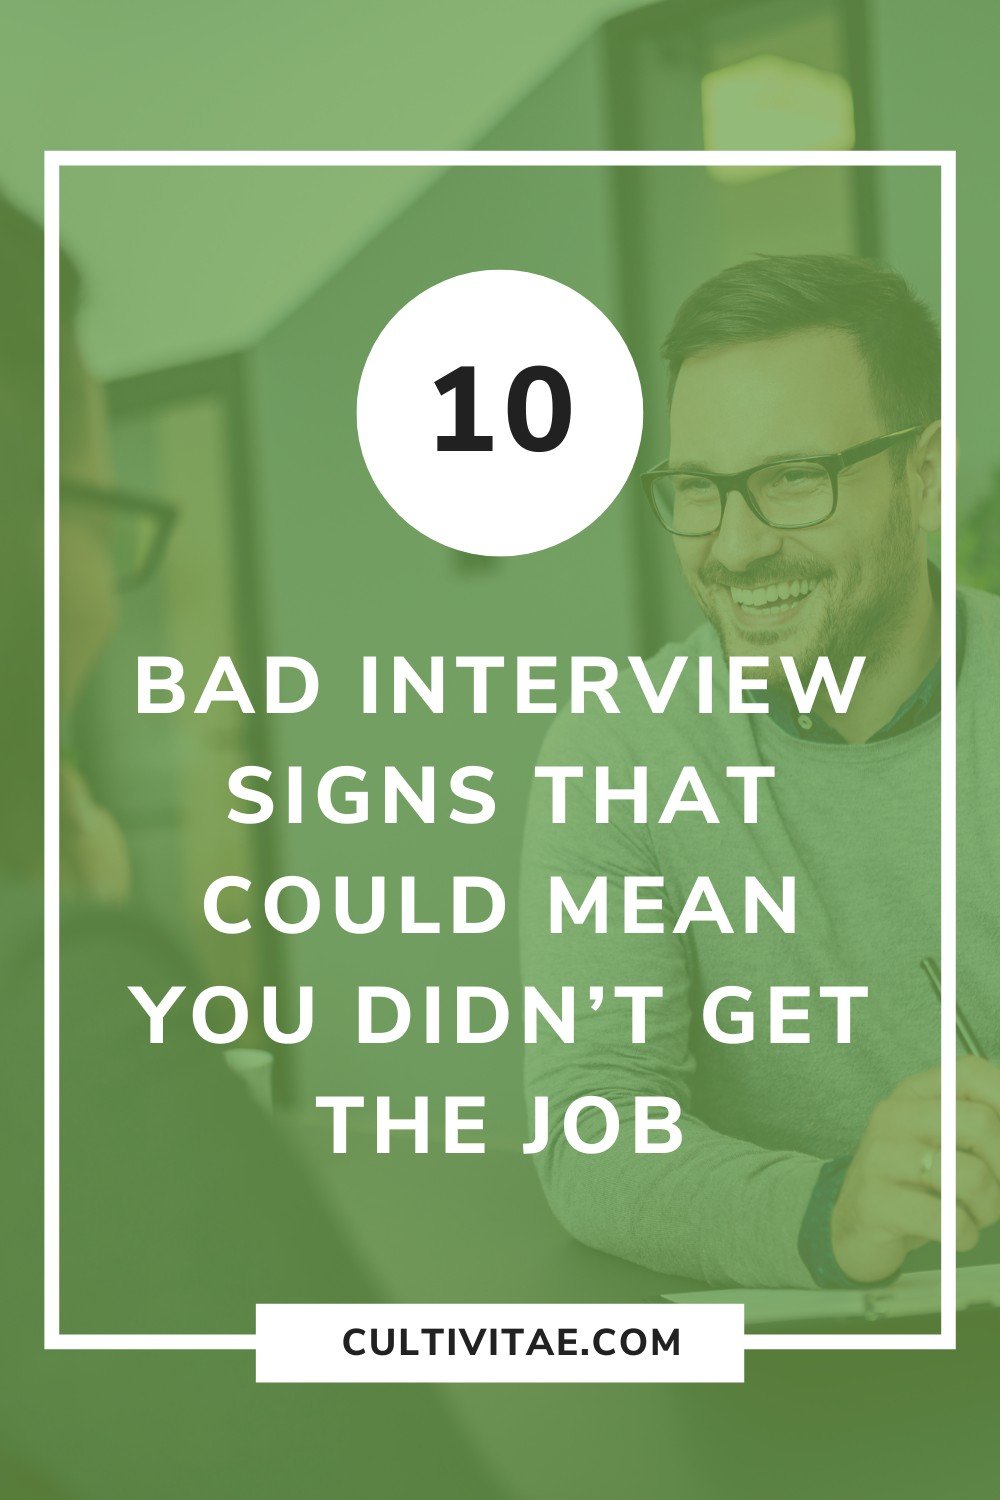 10 Bad Interview Signs That Could Mean You Didn’t Get the Job